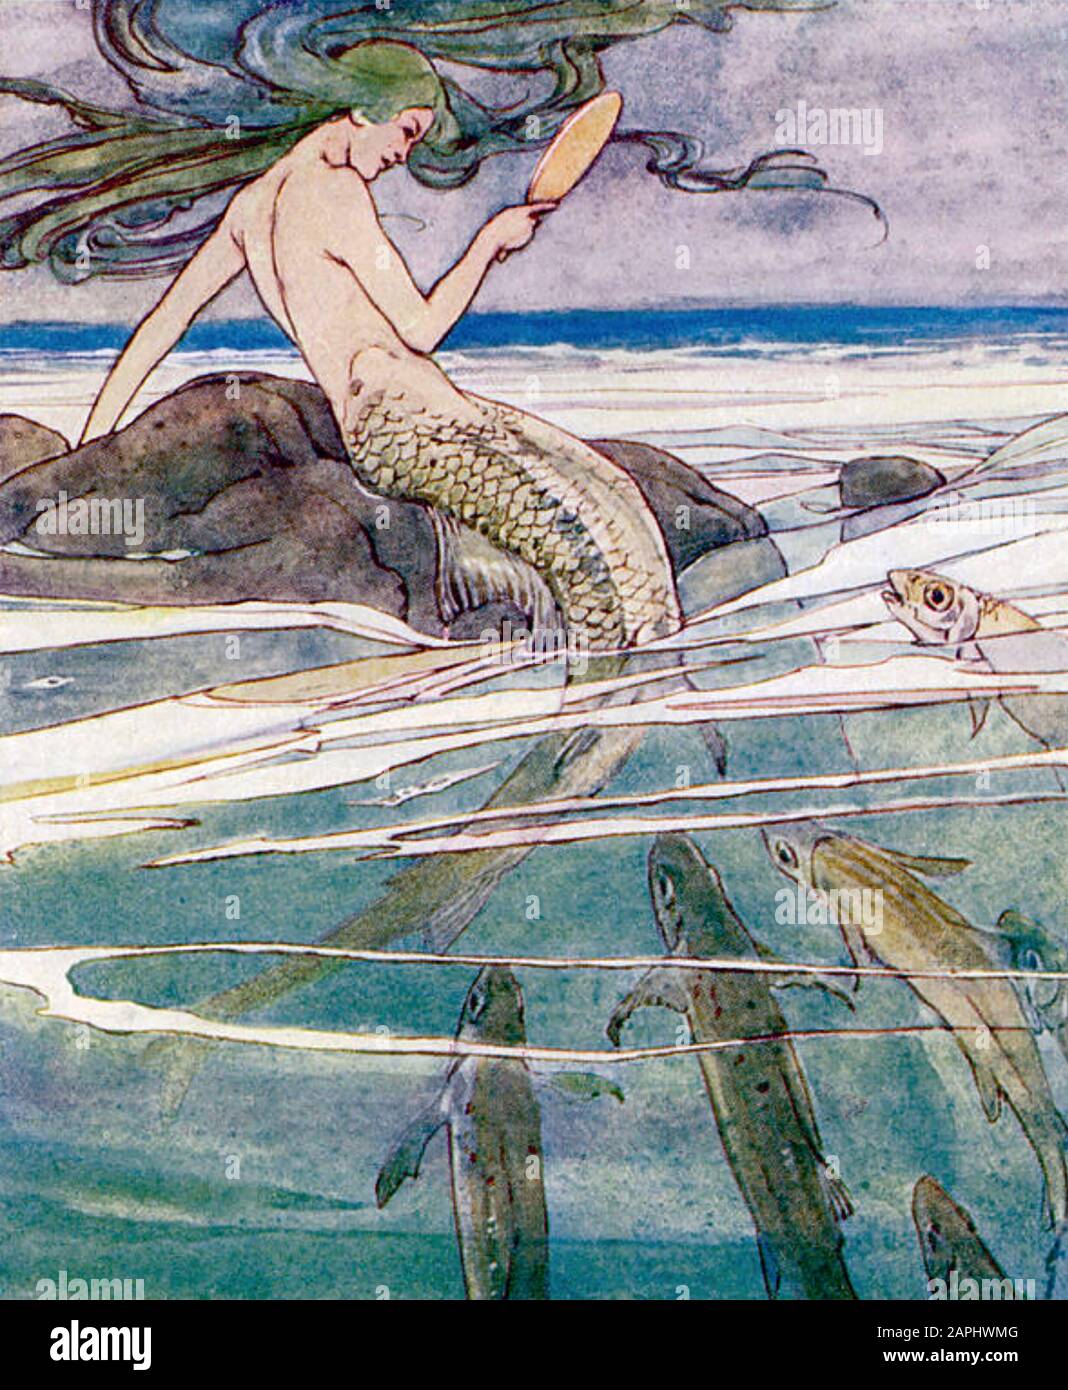 MERMAID WITH FISH in a 1905 illustration, possibly by Arthur Rackham Stock Photo